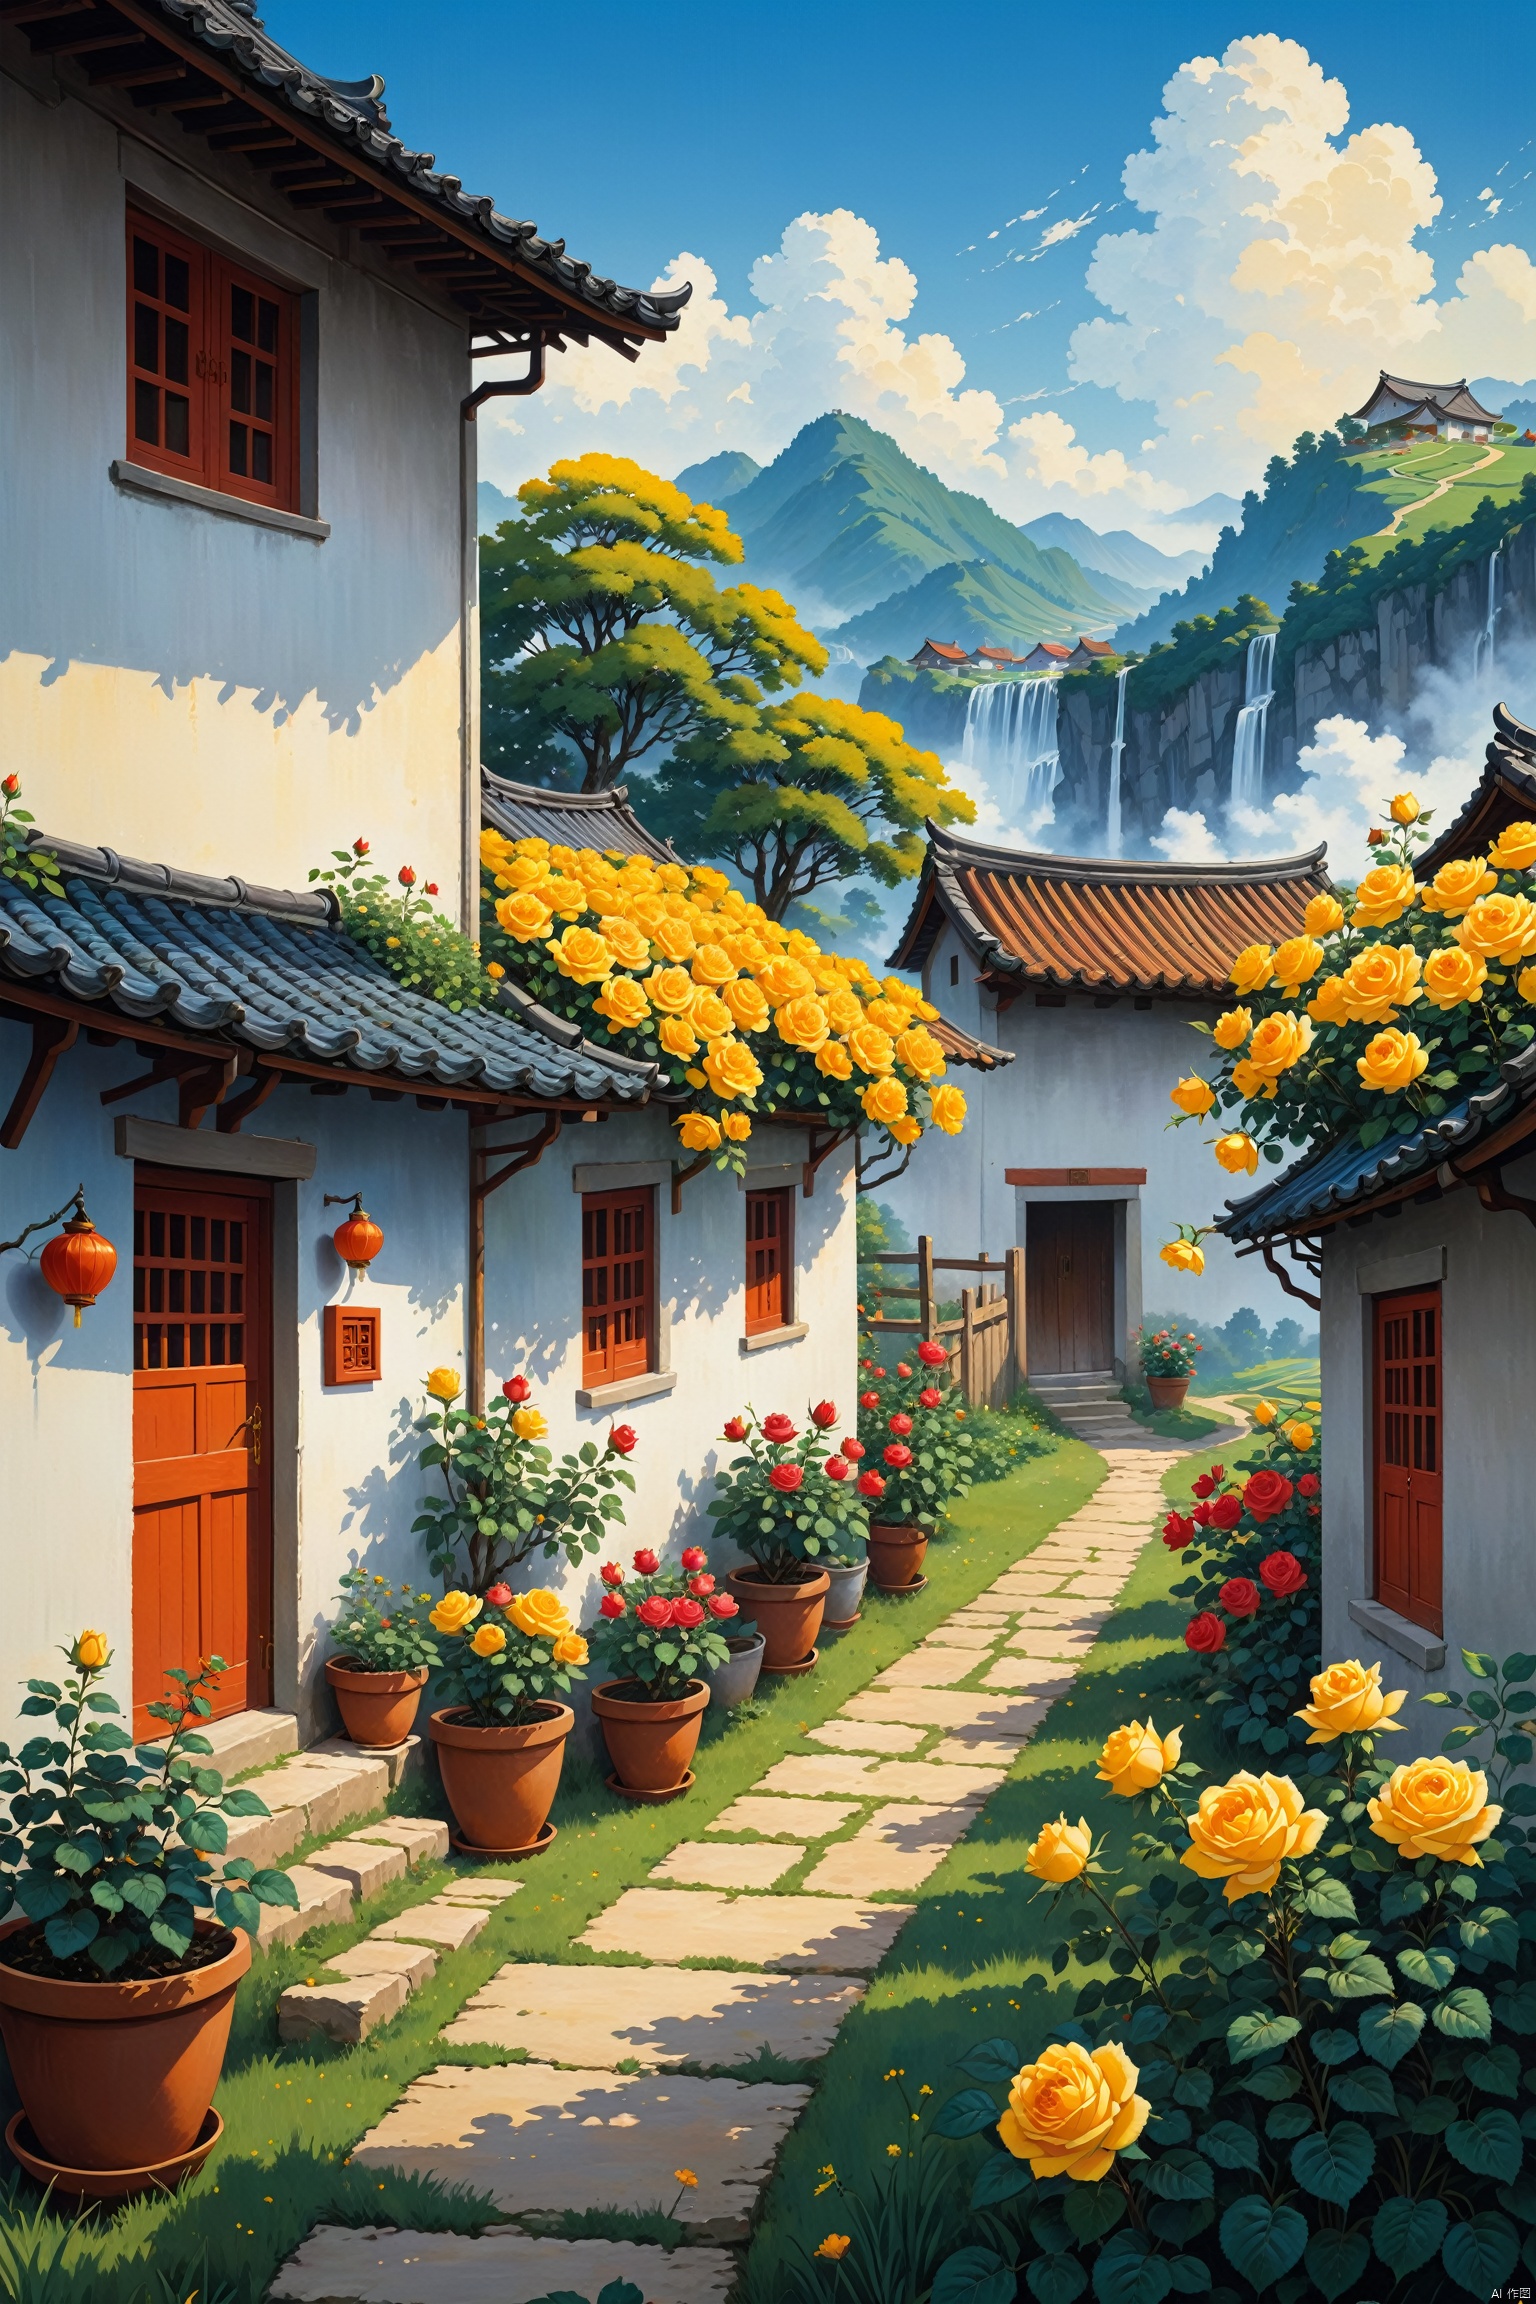  Thick painted Chinese cartoons, farmer paintings, Feng Zikai, textbook illustrations, Eastern poetry and painting, children's illustrations, 1980s illustrations, Swiss small towns, rural vegetable gardens, wells, fences, waterfalls, landscapes, houses, outdoor, sky, windows, plants, sky, grass, clouds, potted plants, trees, doors, flower pots, blue sky, architecture, chimneys, yellow flowers, roses, 24K, masterpieces, the best quality, novel illustration style, depicting rural life, Warm visuals, children's book illustrations, official art, digital painting, meticulous character portrayal, clear facial features, complete fingers, perfect composition,